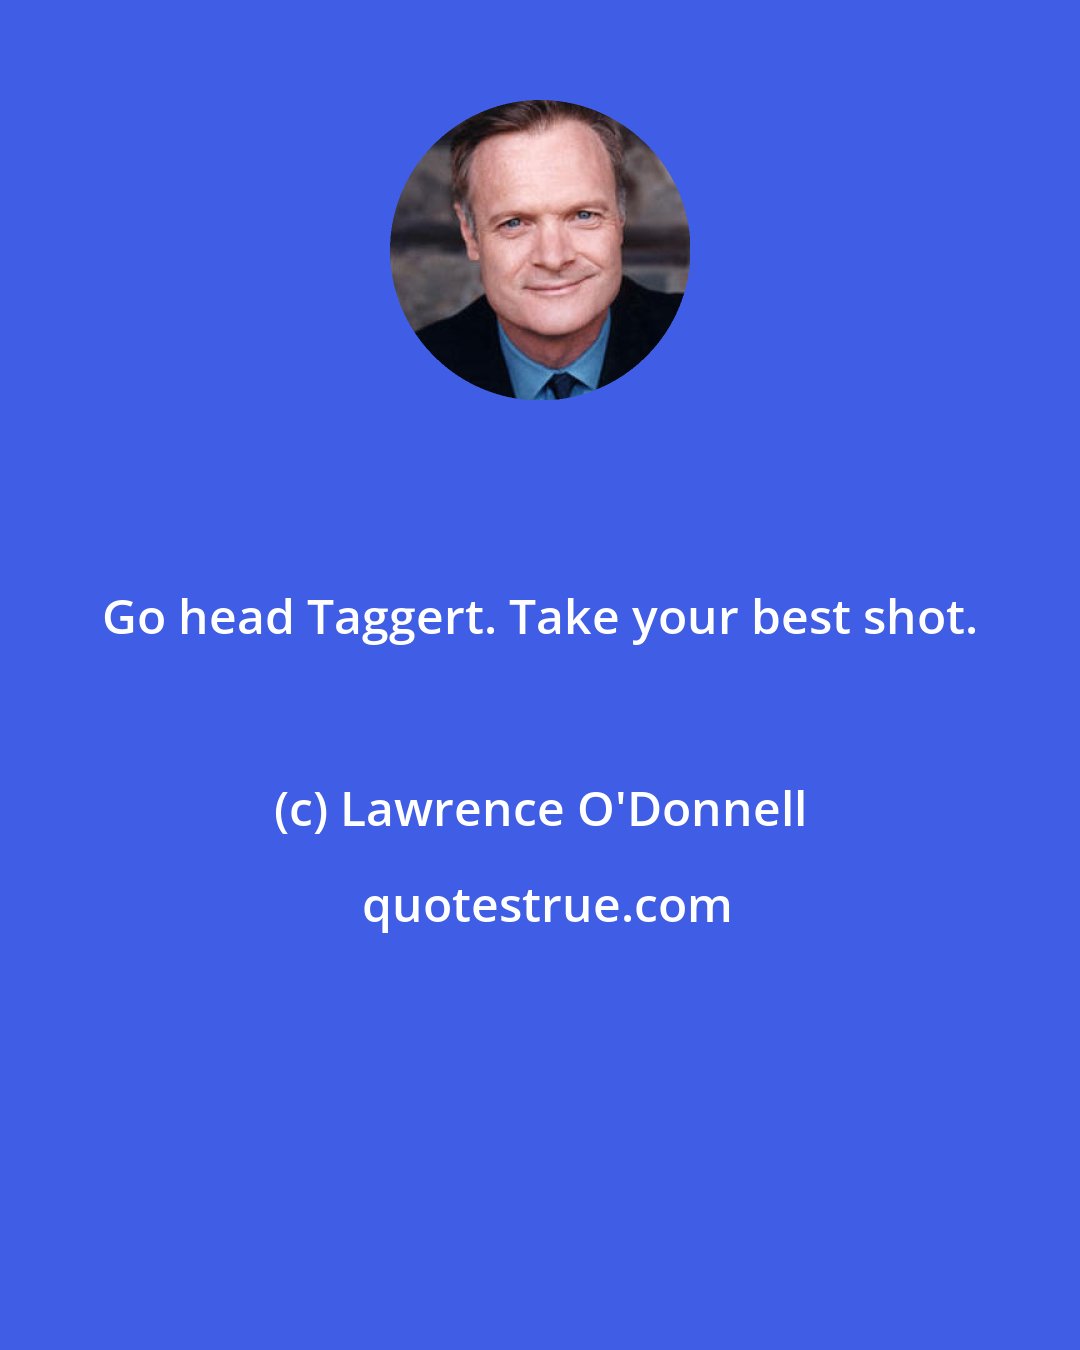 Lawrence O'Donnell: Go head Taggert. Take your best shot.